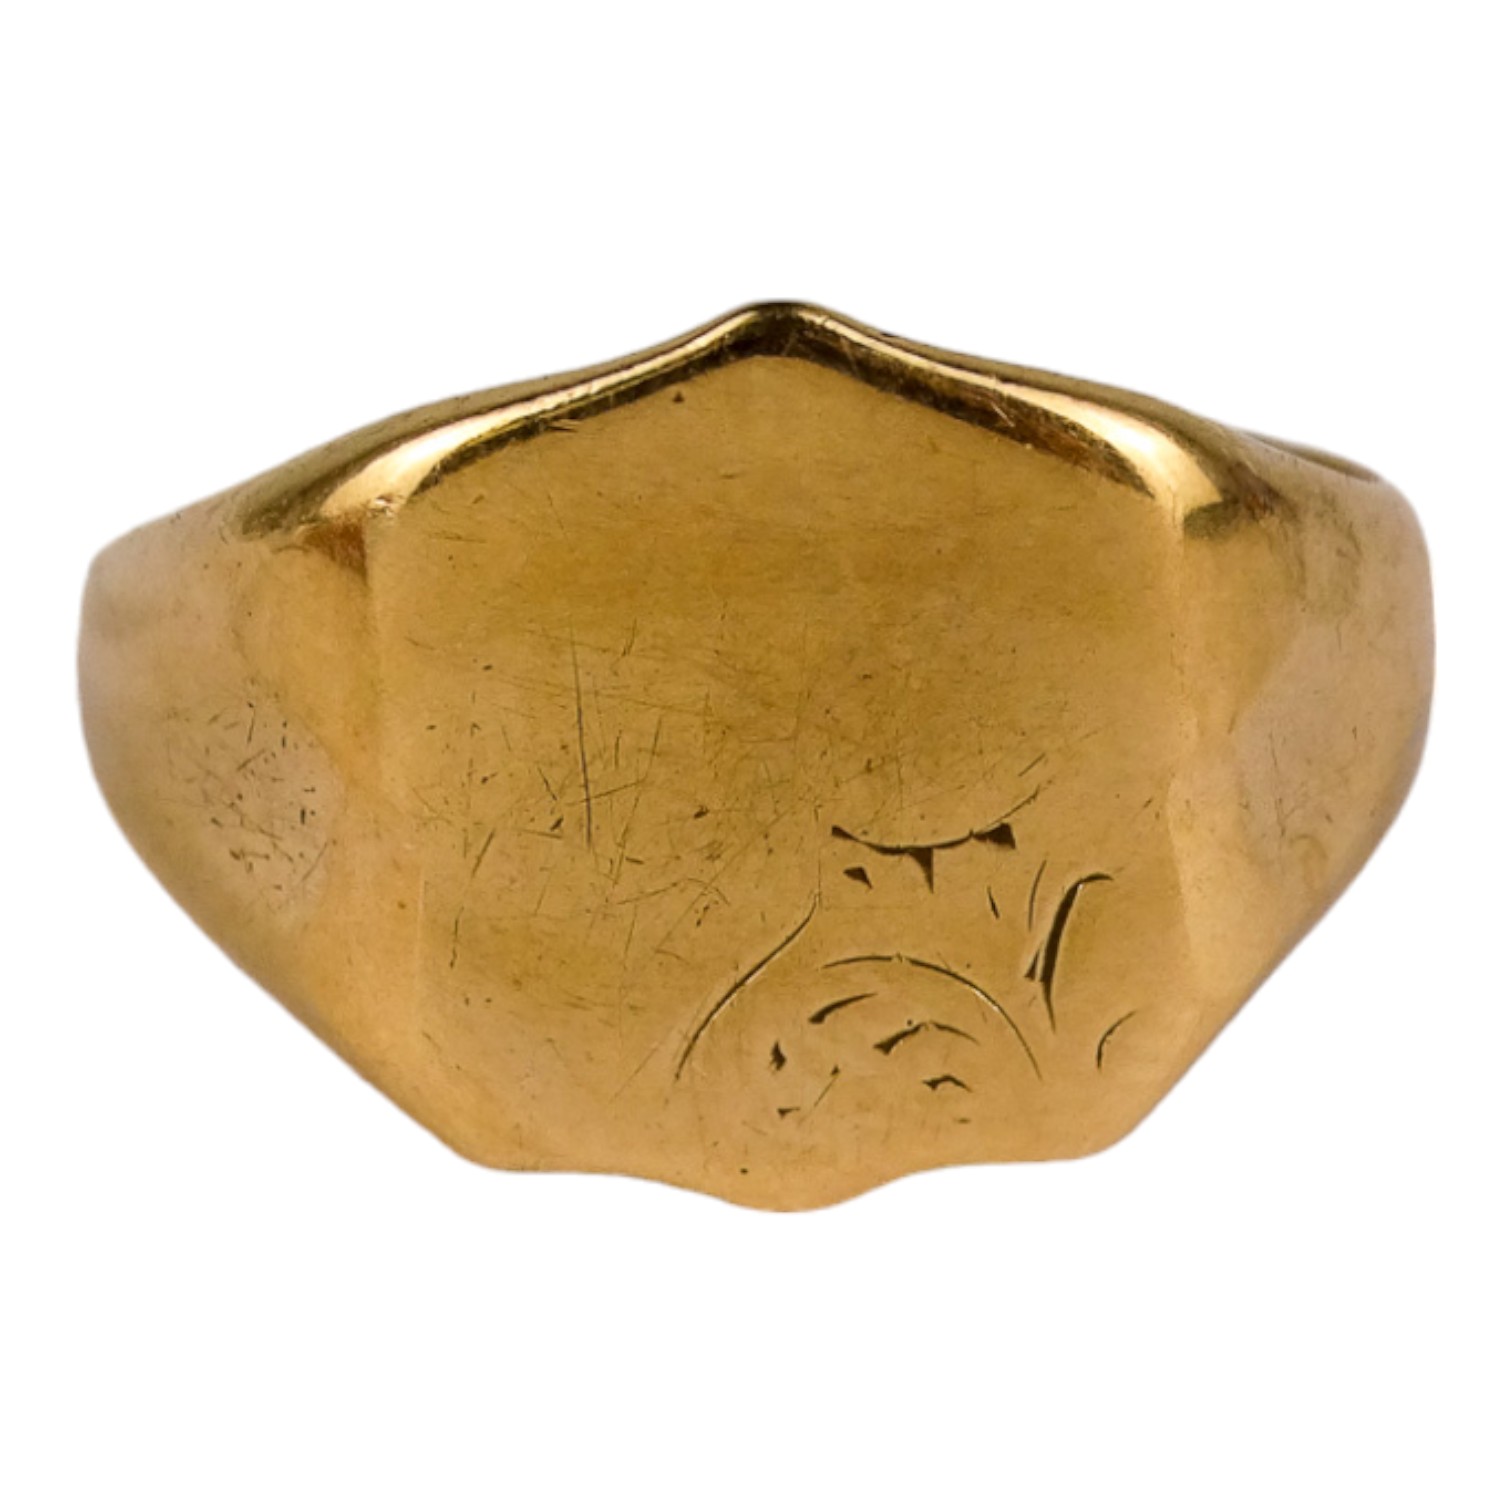 A 9ct yellow gold signet ring - size Q/R, weight 4.1g.